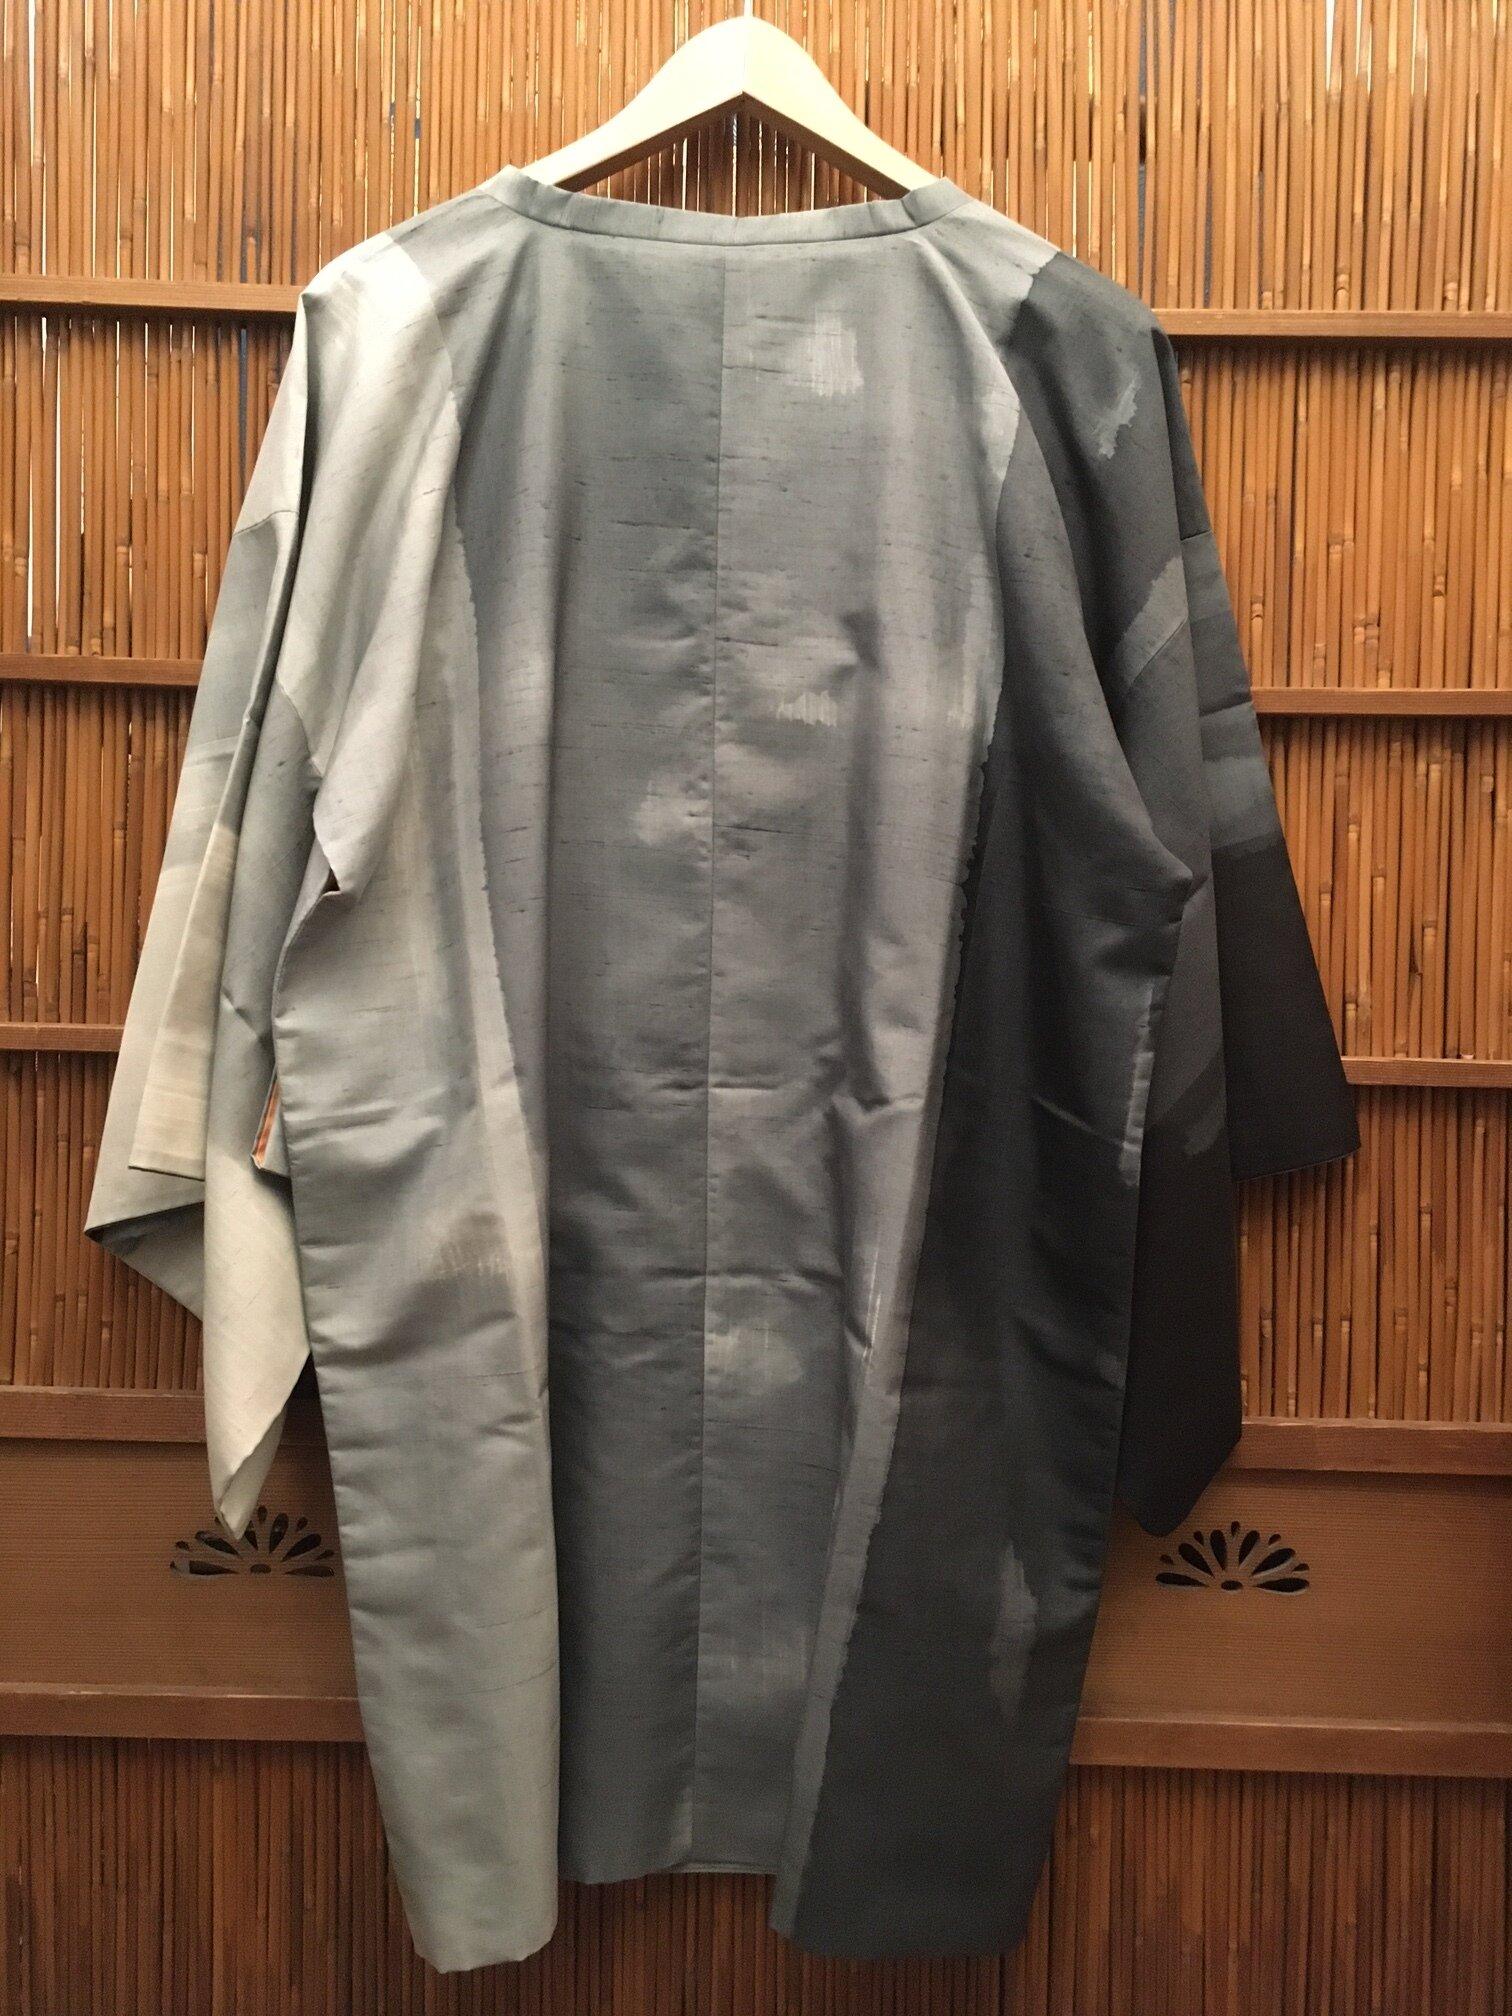 This is a thin coat which we ware on the Kimono. It is for the spring. 
This kind of coat is called Michiyuki in Japanese.
This coat was made in Japan around 1980s in Showa era.

Dimensions:
Total wide : 85 cm
Hight: 67 cm
Sleeve wide : 33 cm
Sleeve